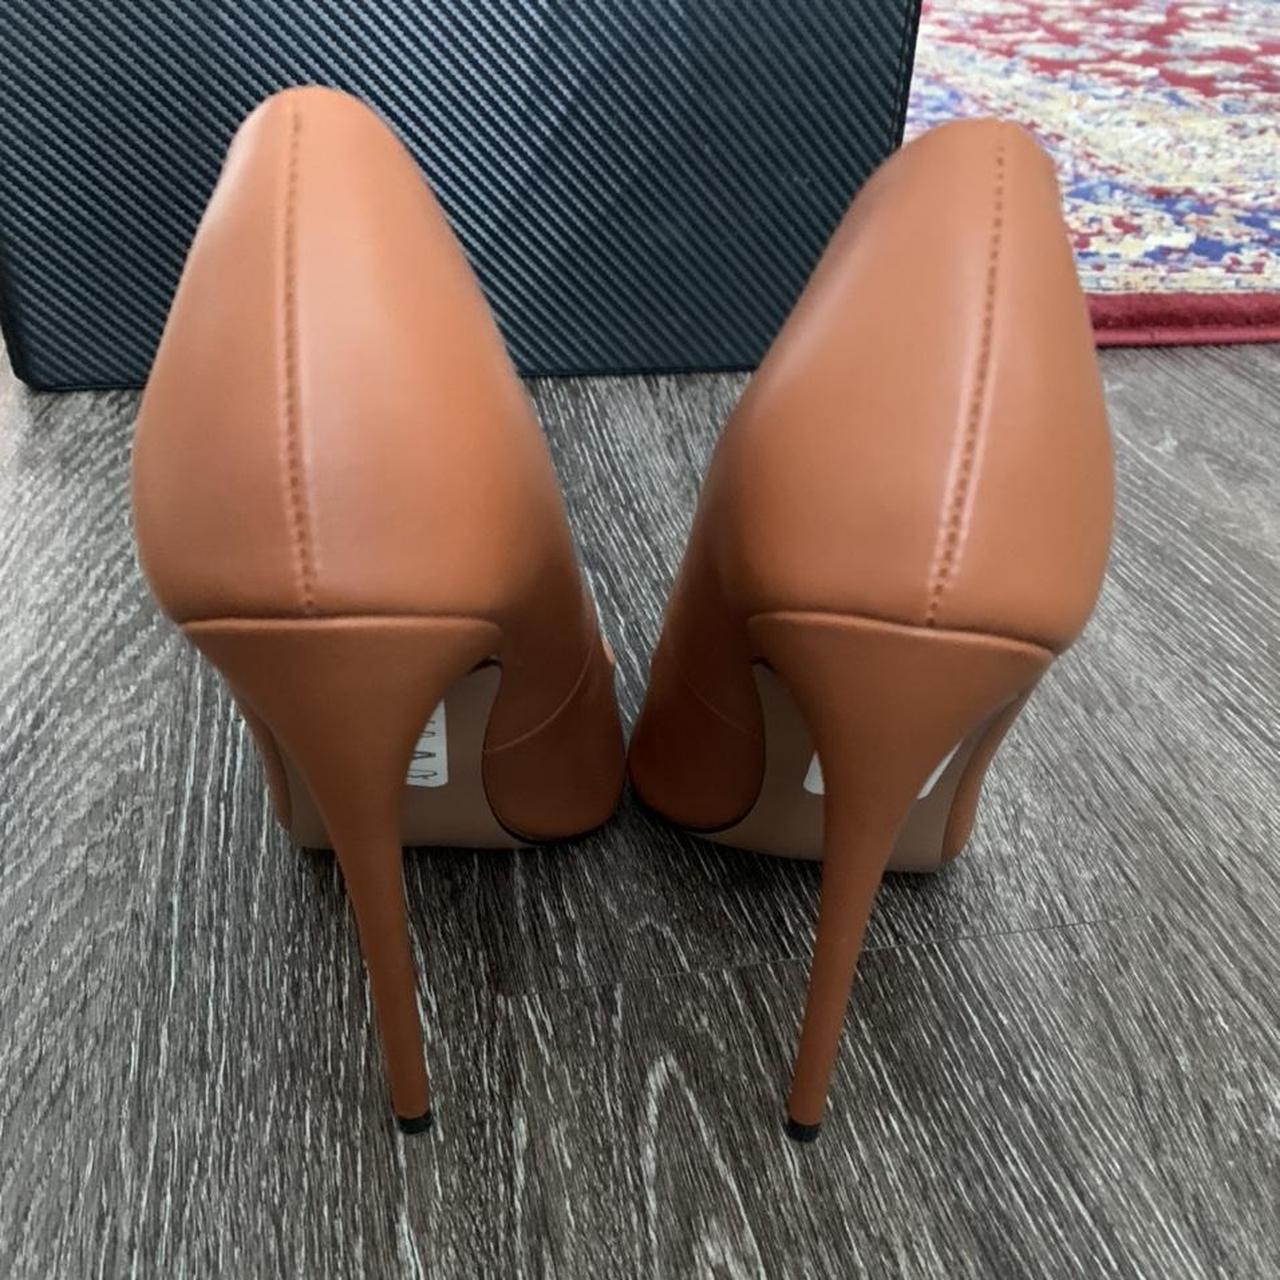 ASOS Women's Tan and Brown Courts (3)